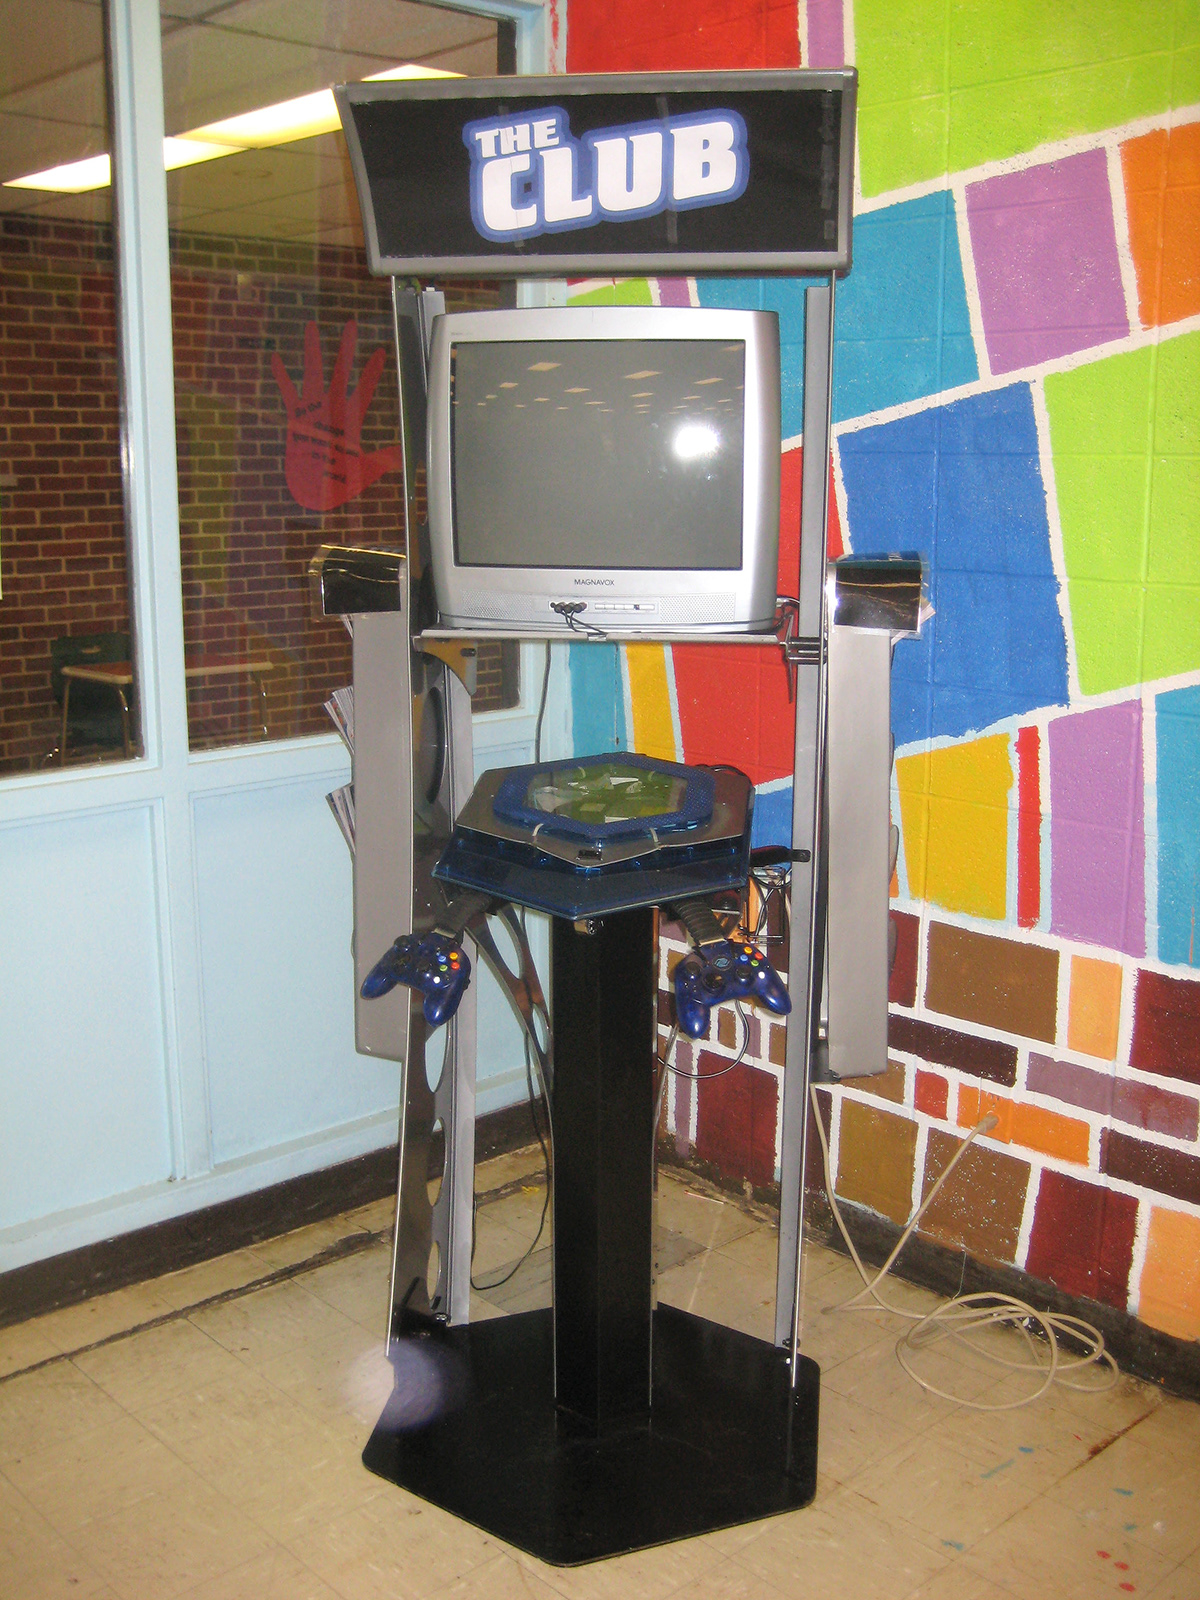 boys and girls club Kiosk GameCube xbox game videogame redesign recycling lighting reverse-engineering Promotional play kids hardware metal plastic rebuild innovation blue logo graphic Printing Electronics electrical wiring chassis Project controller marquee brain repurposed refurbished restoration